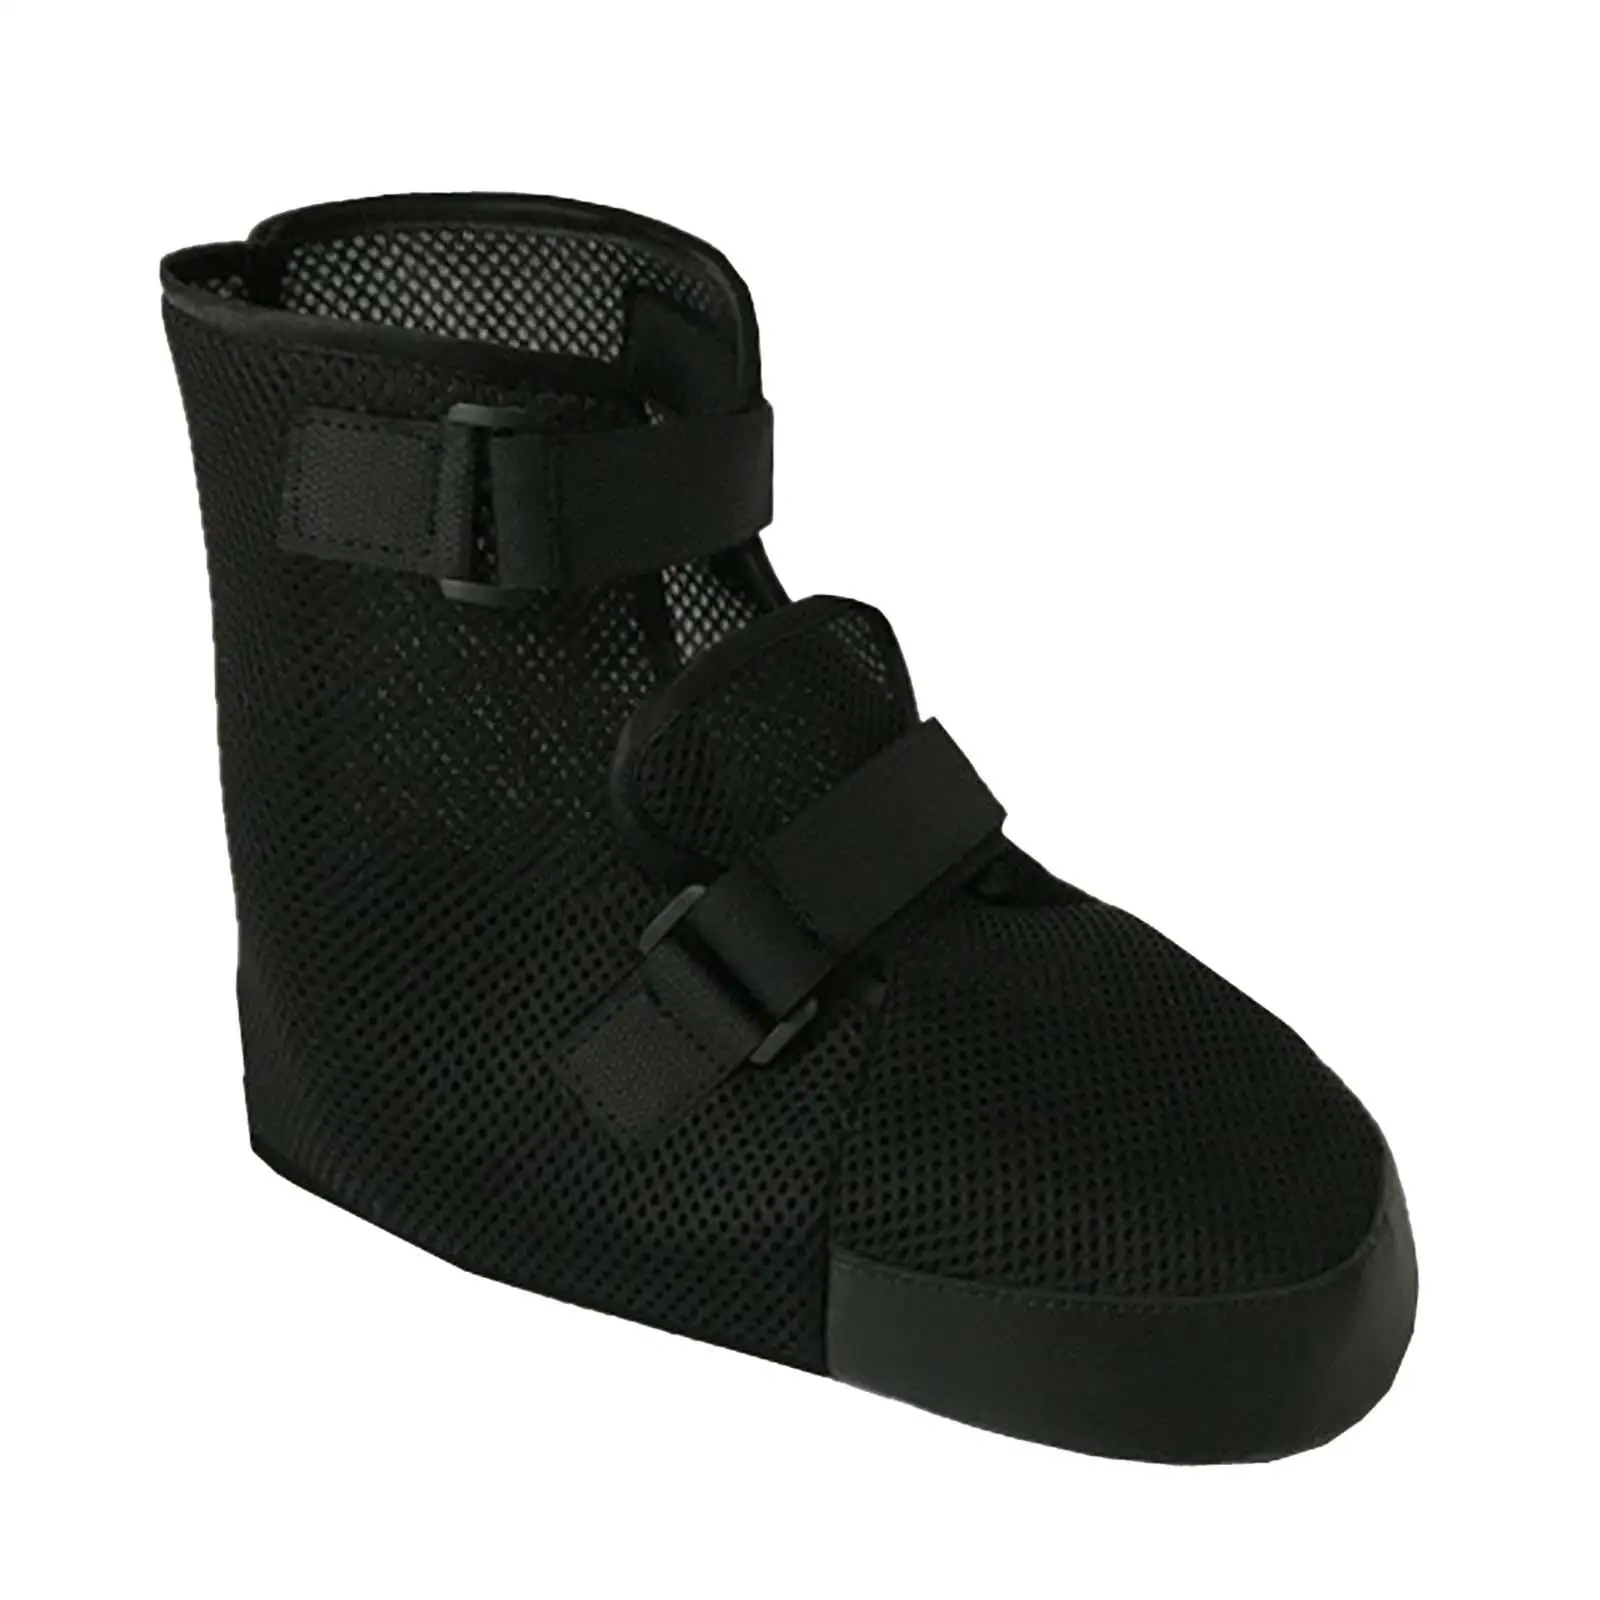 Foot Protection Cast Boot Post OP Shoe Medical Walking Boot for Men Women Post Injury Surgical Broken Bone Fracture Recovery